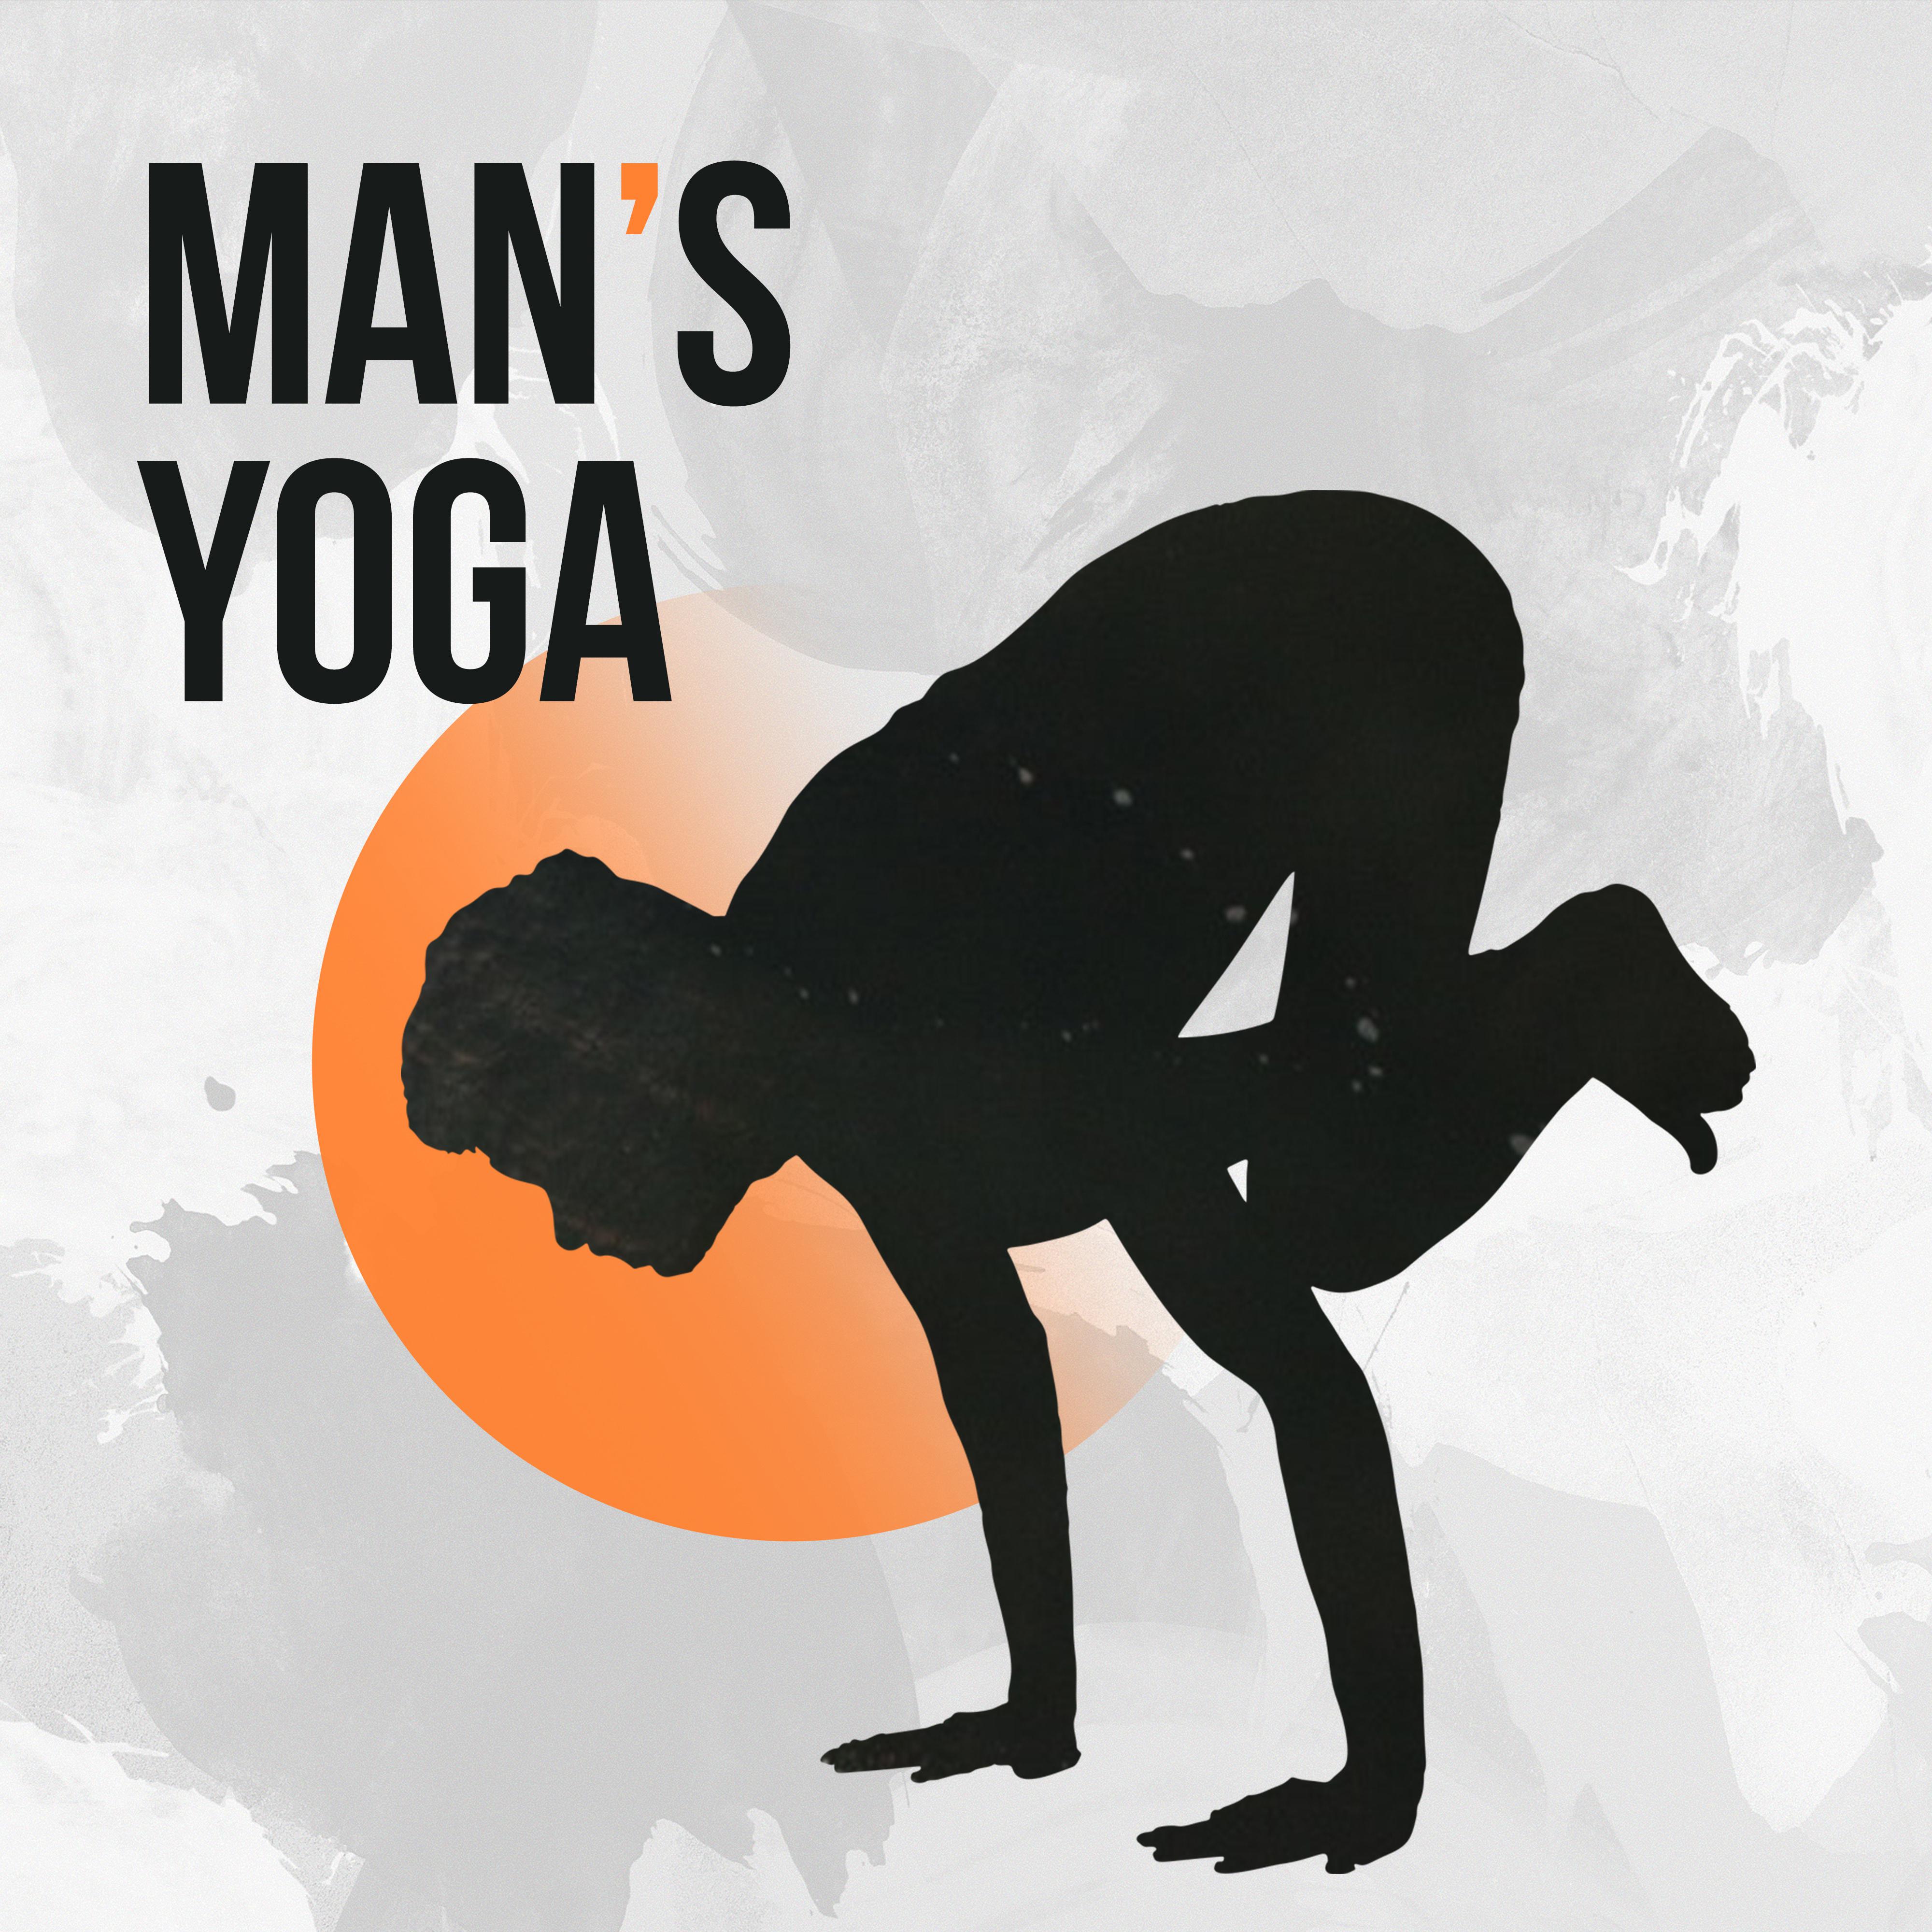 Men’s Yoga: Music for Men to Exercise and Practice Yoga